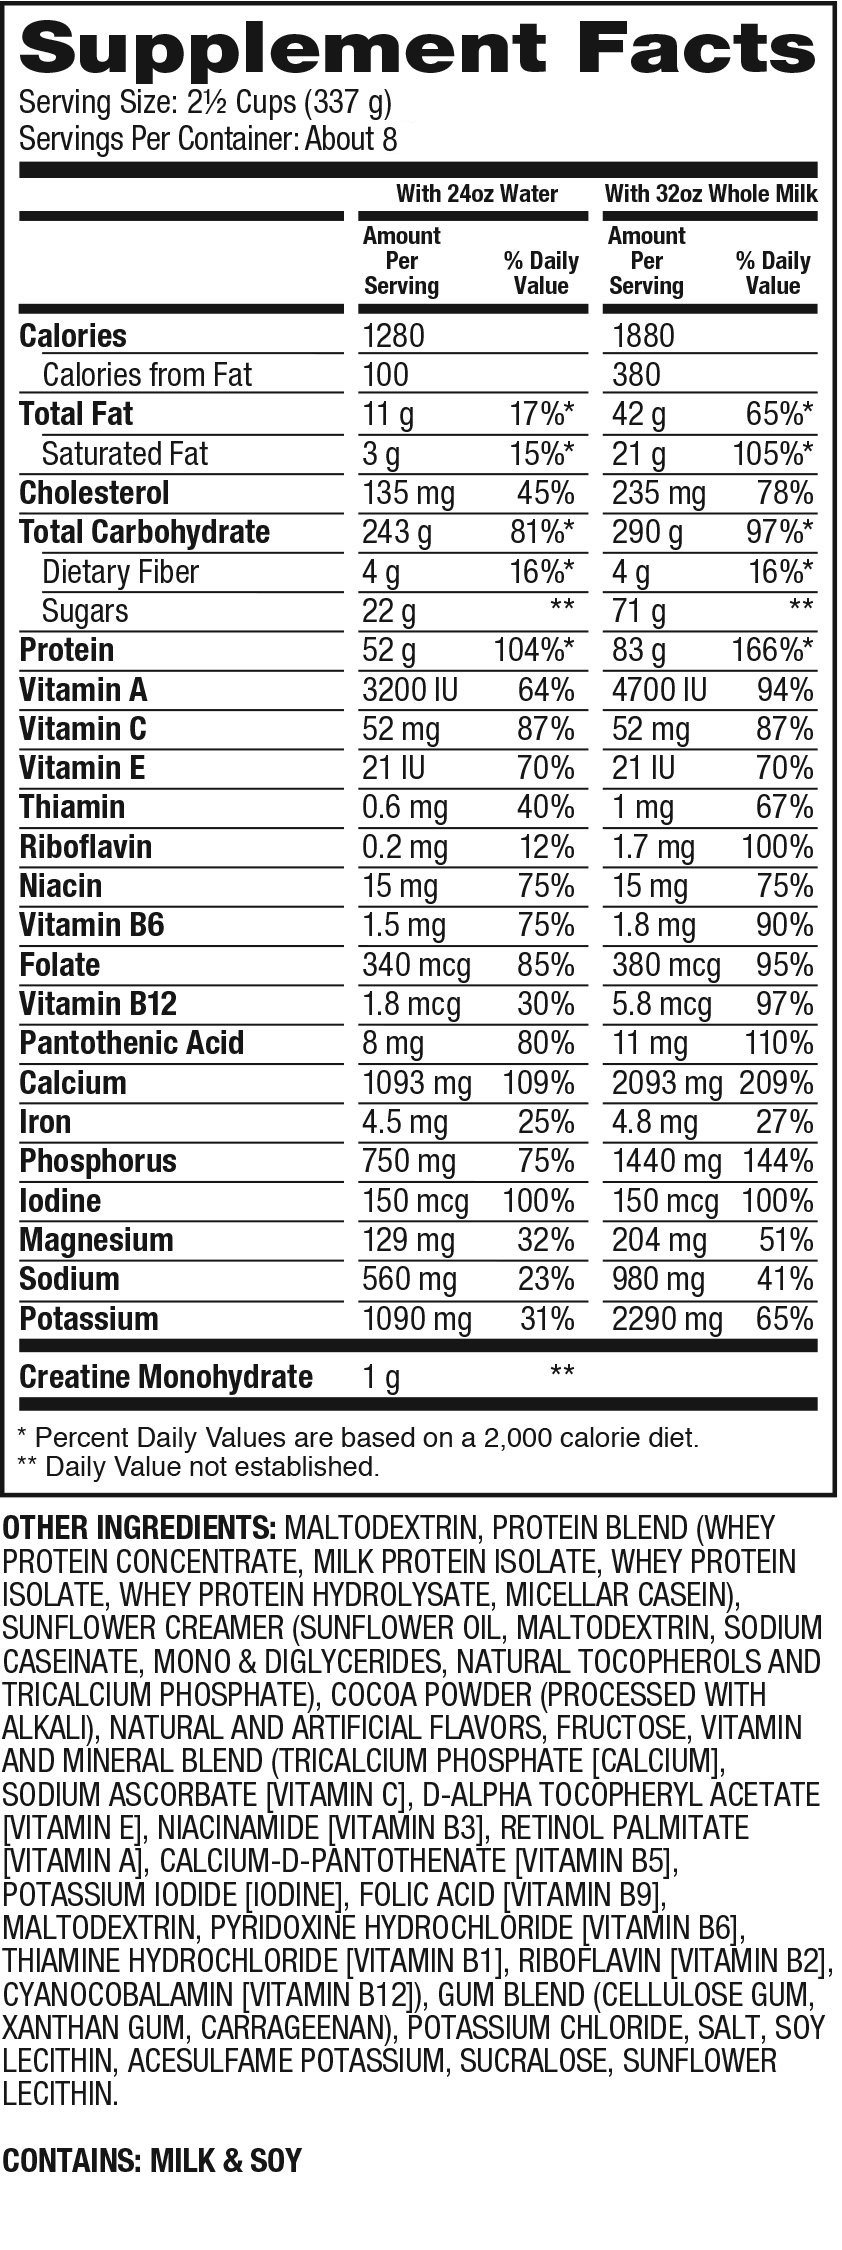 Supplement facts showing ingredients, servings, and daily nutritional values including vitamins, minerals and calories.